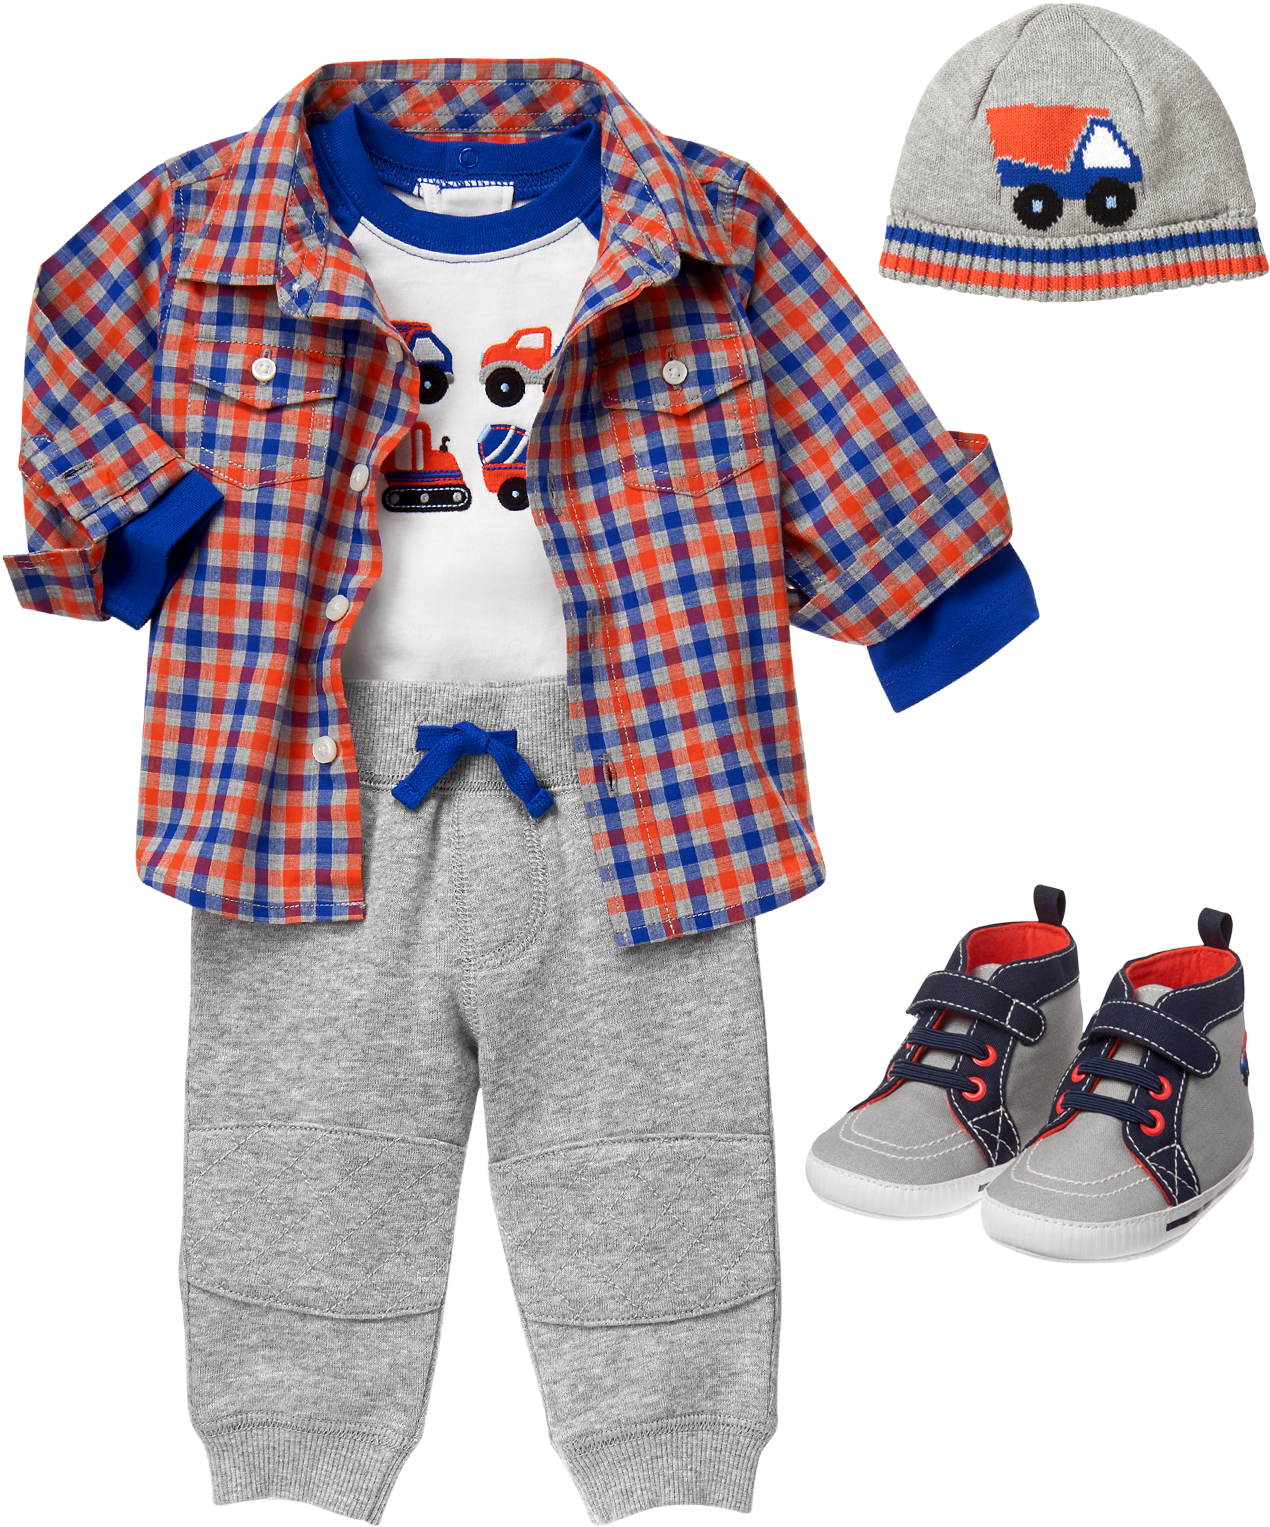 A Baby Boy Outfit With A Hat And Shoes